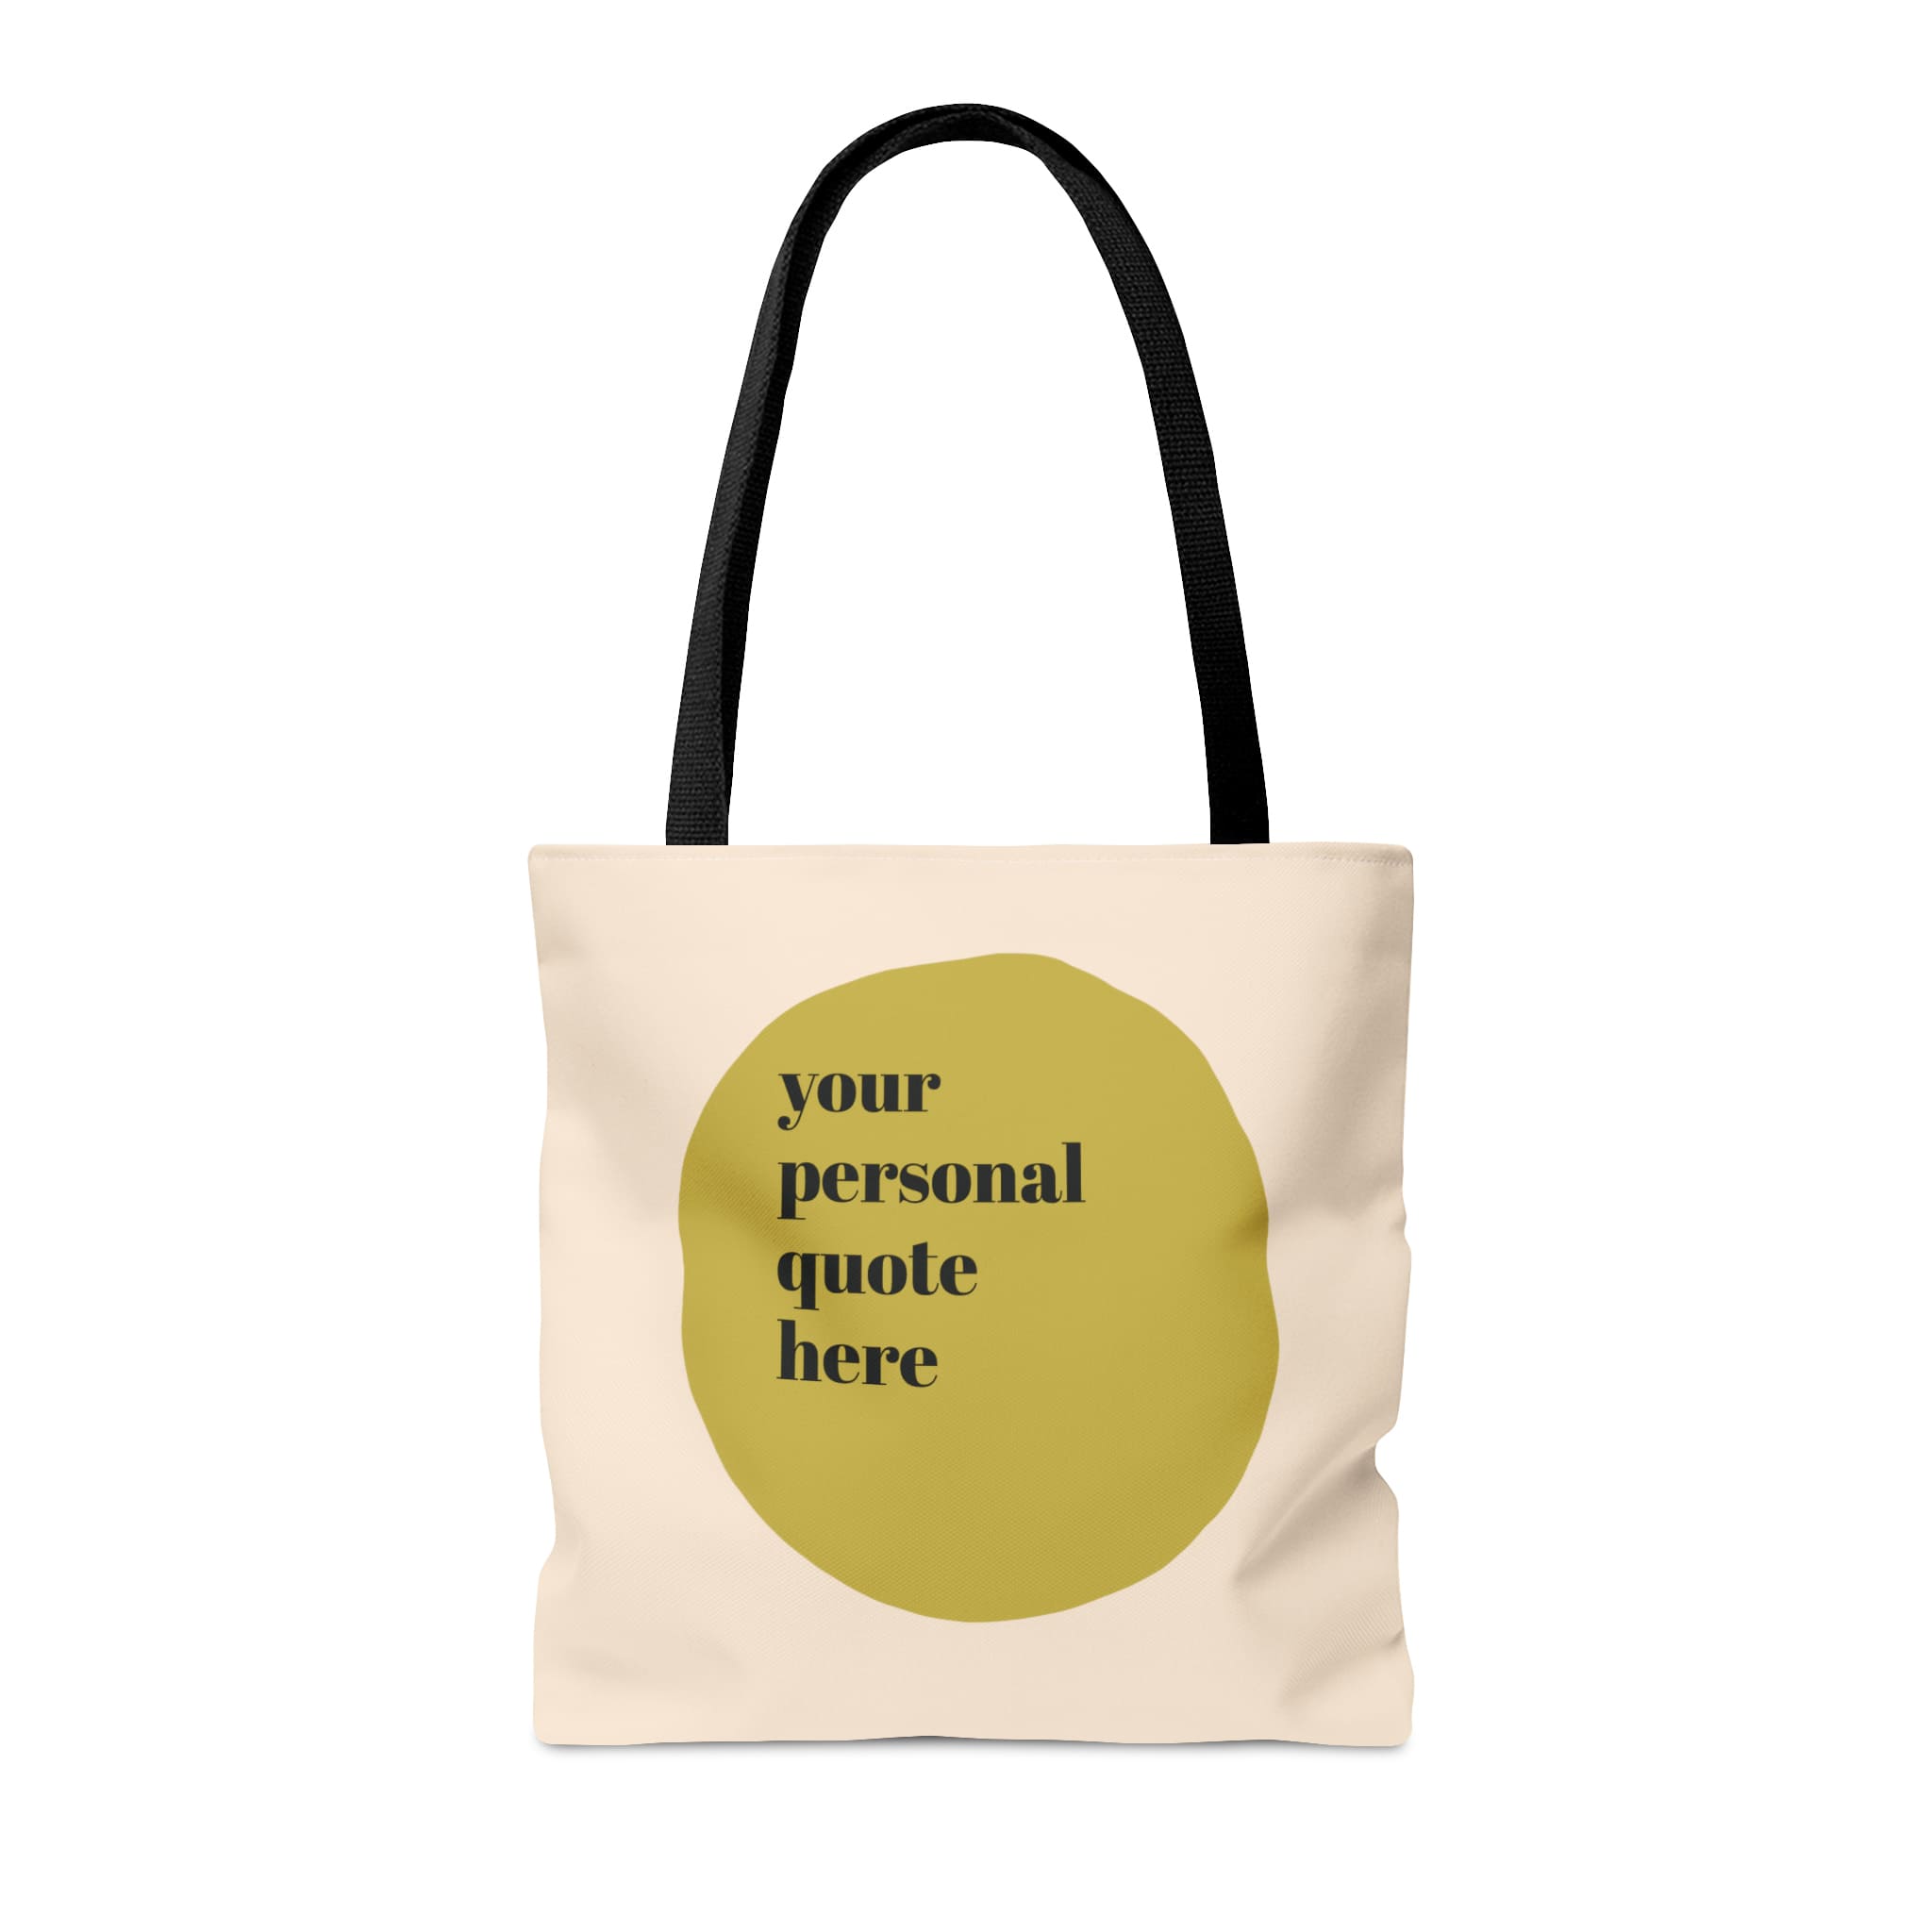 custom line portrait tote bags with personal quote in the back on color blocking background super cute fashion gift